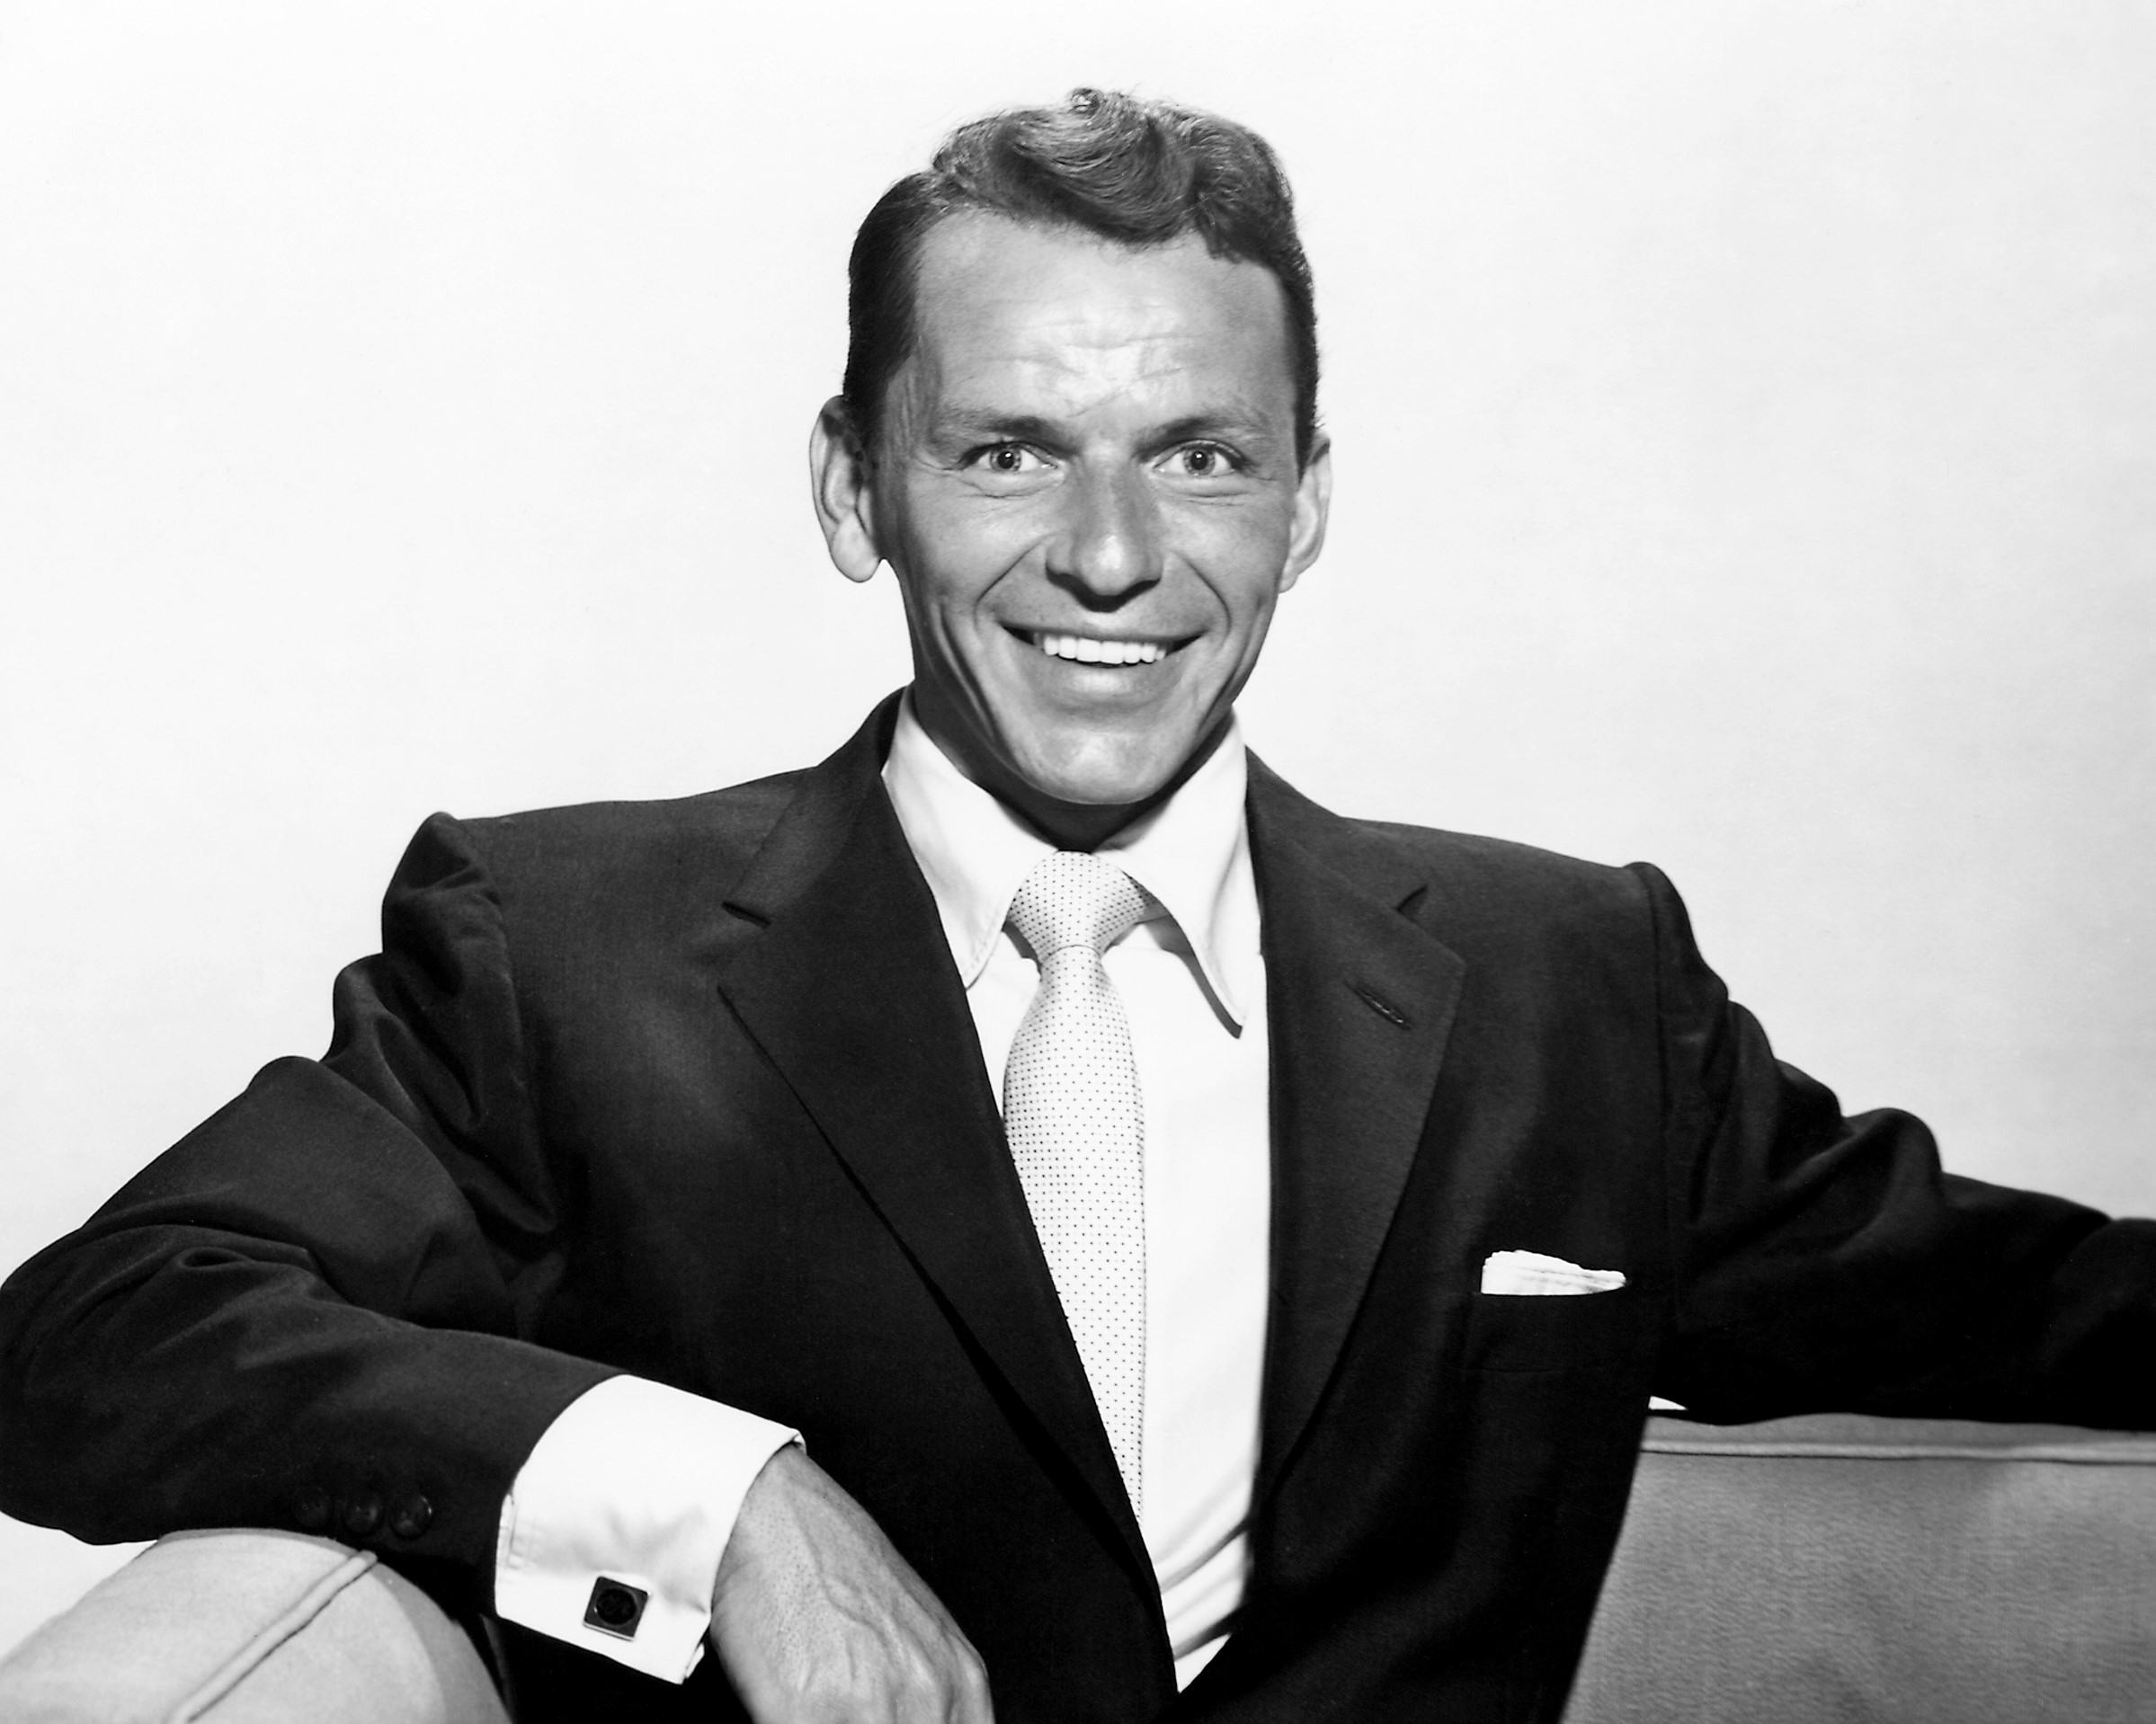 A black and white photo of Frank Sinatra sitting and wearing a suit.